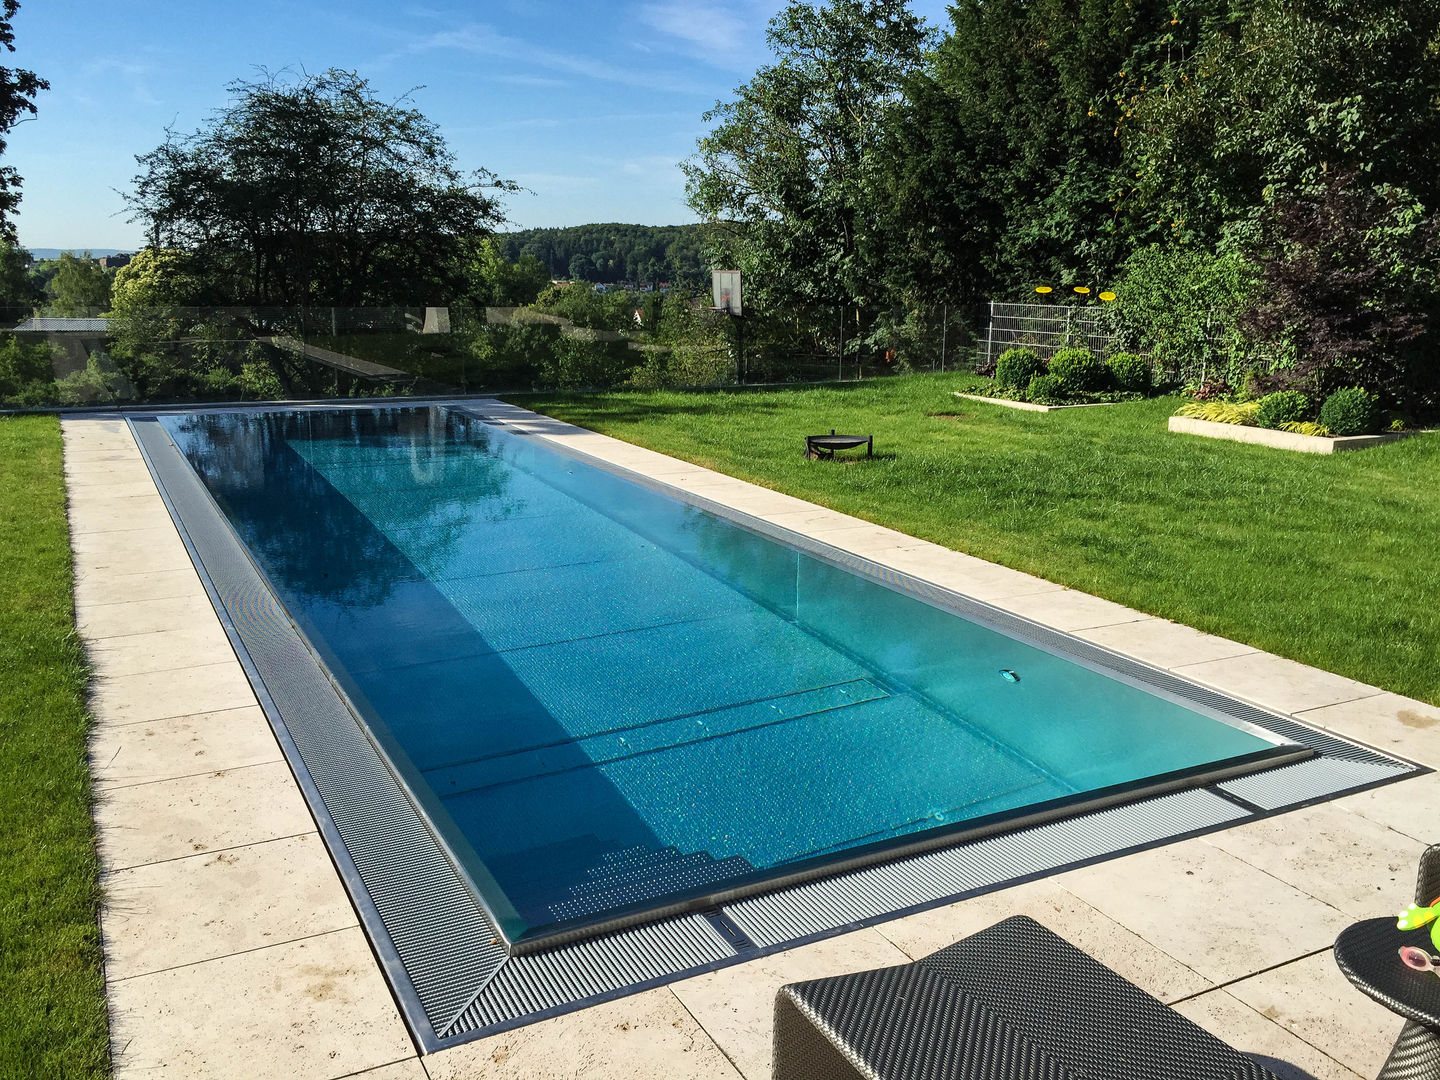 Classic Modular Stainless Steel Pool homify Moderne Pools